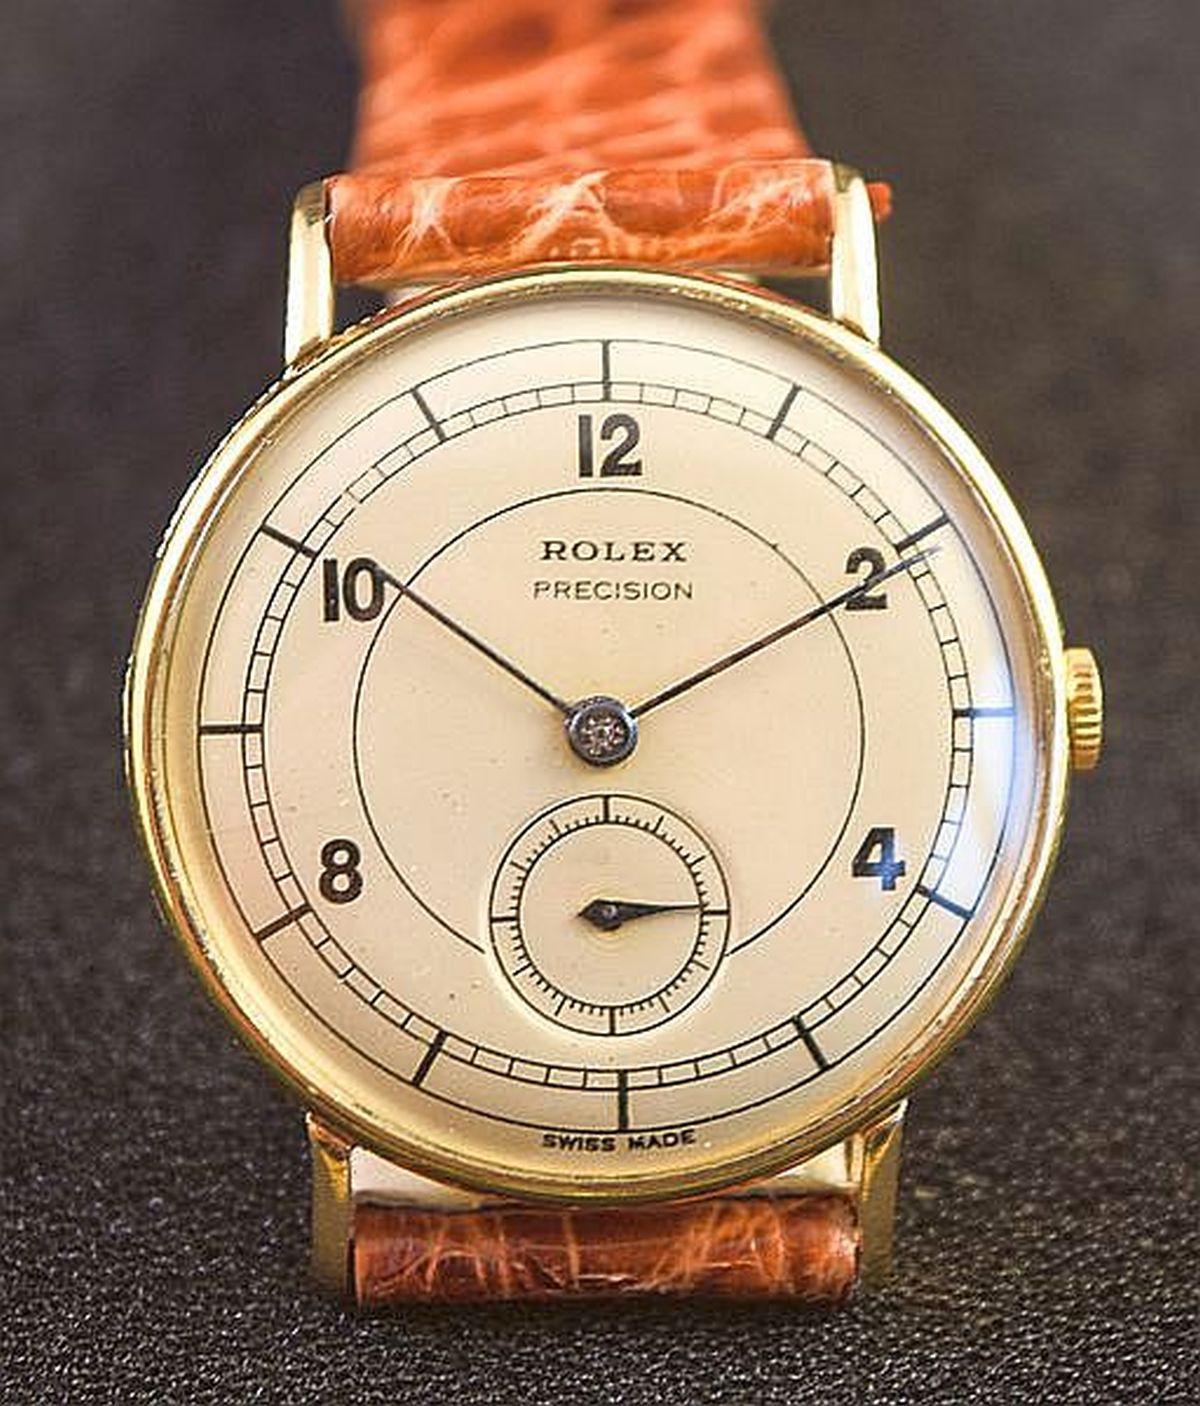 ROLEX PRECISION REF 1923 RARE COIN EDGE VINTAGE
 Extremely rare Vintage Rolex. Collectors dream watch .
1950's Manual winding mechanical watch
Case has coin edges that are sharp and in good condition. 
Watch is larger than usual and was considered